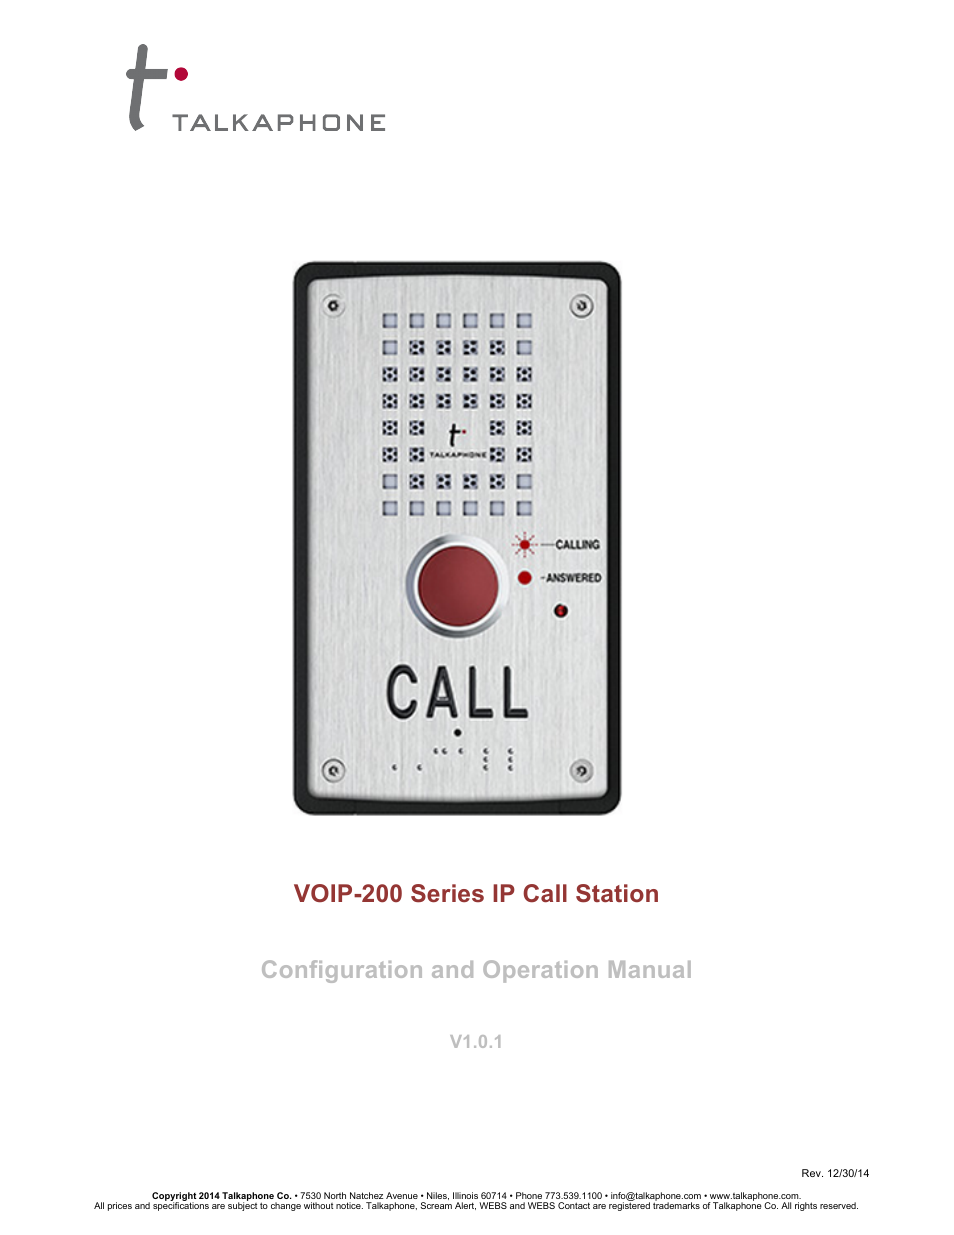 VOIP-201C Surface Mount Single Button Compact IP Call Station